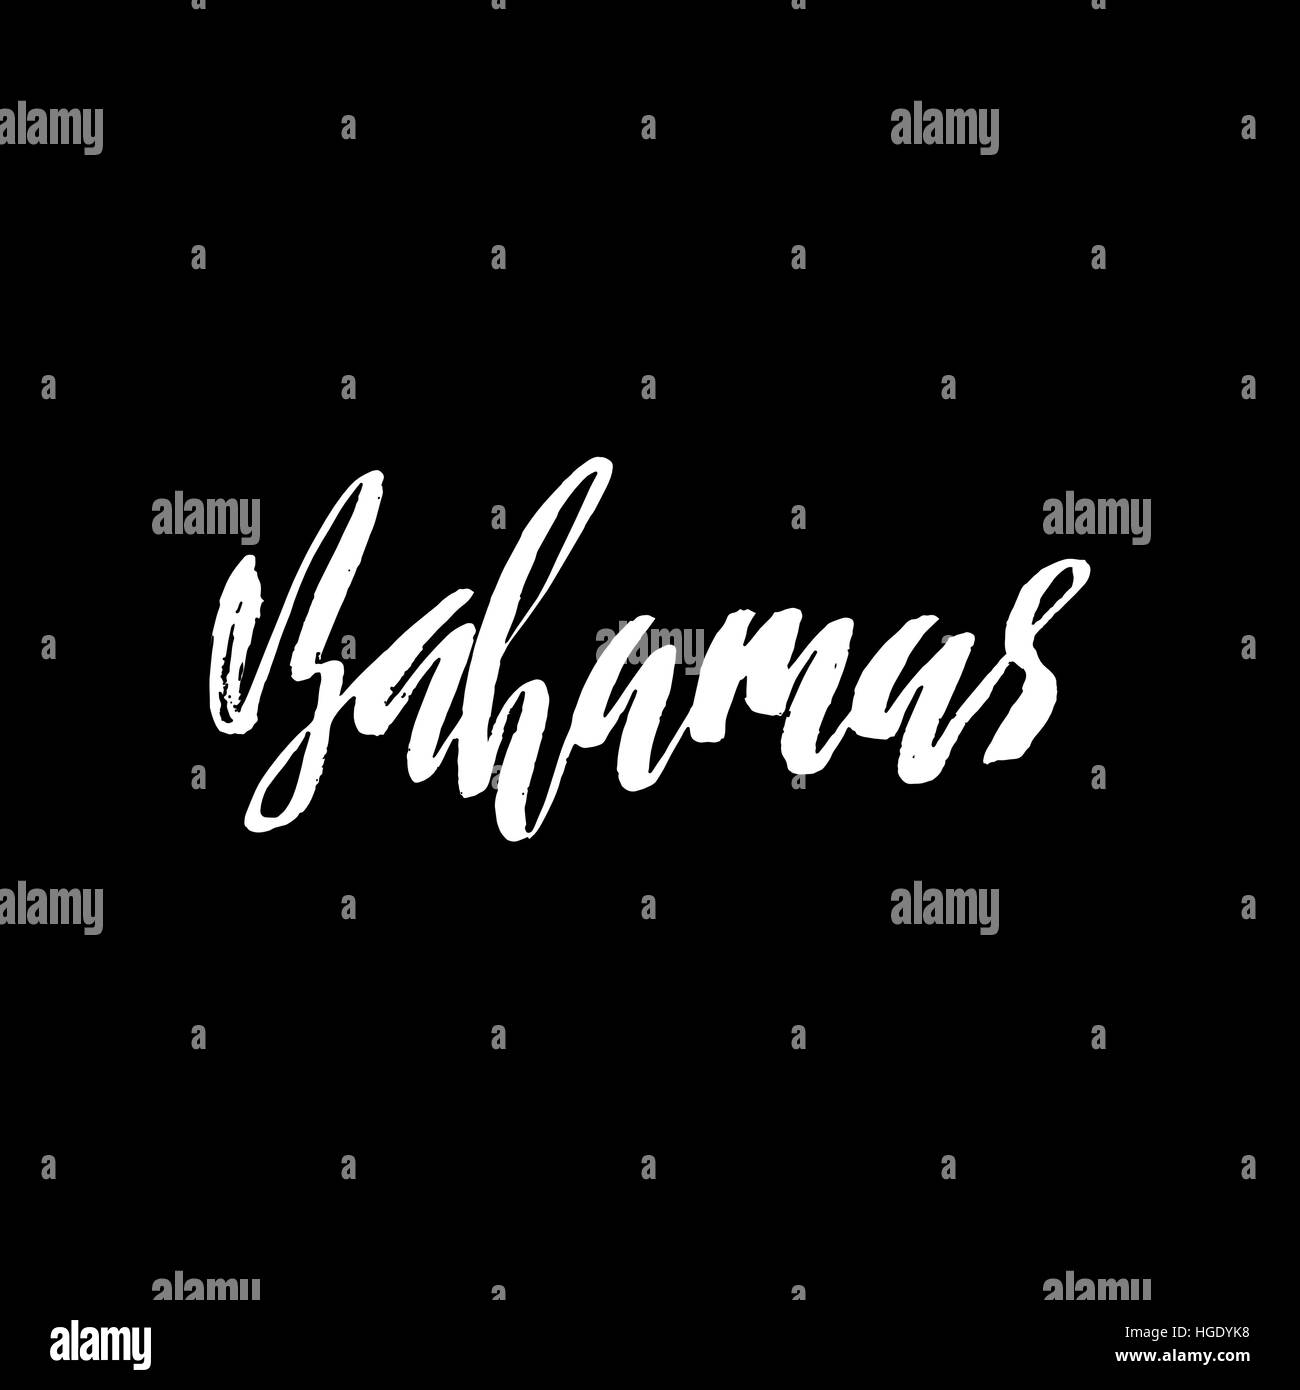 The Bahamas, hand-lettered paint, hand drawn calligraphy, vector illustration. Stock Vector